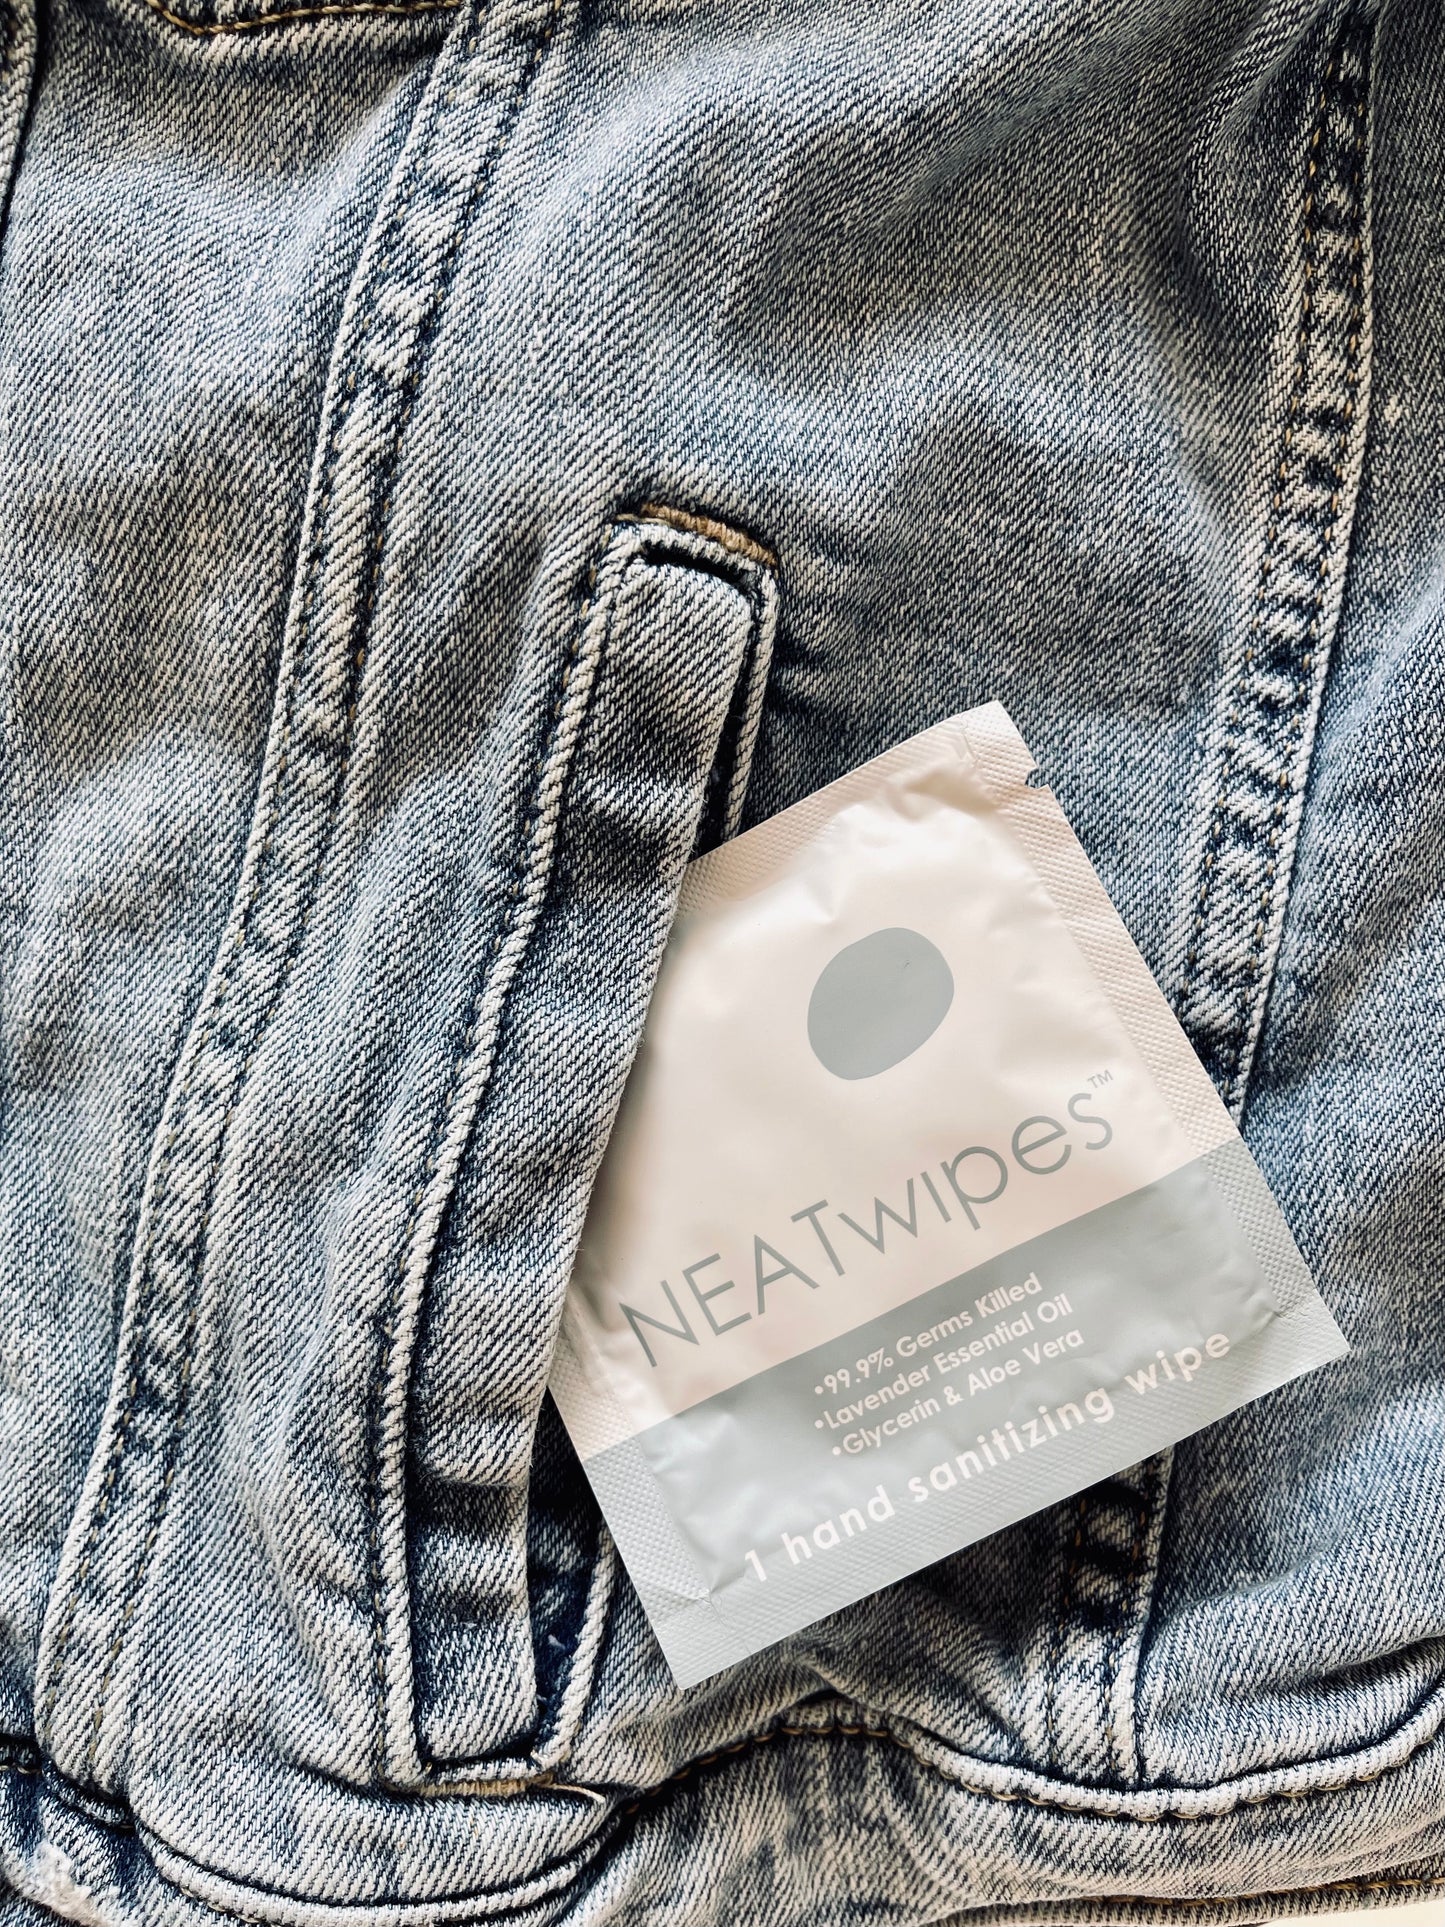 NEATwipes 24-Individually Wrapped Handwipes | Lavender